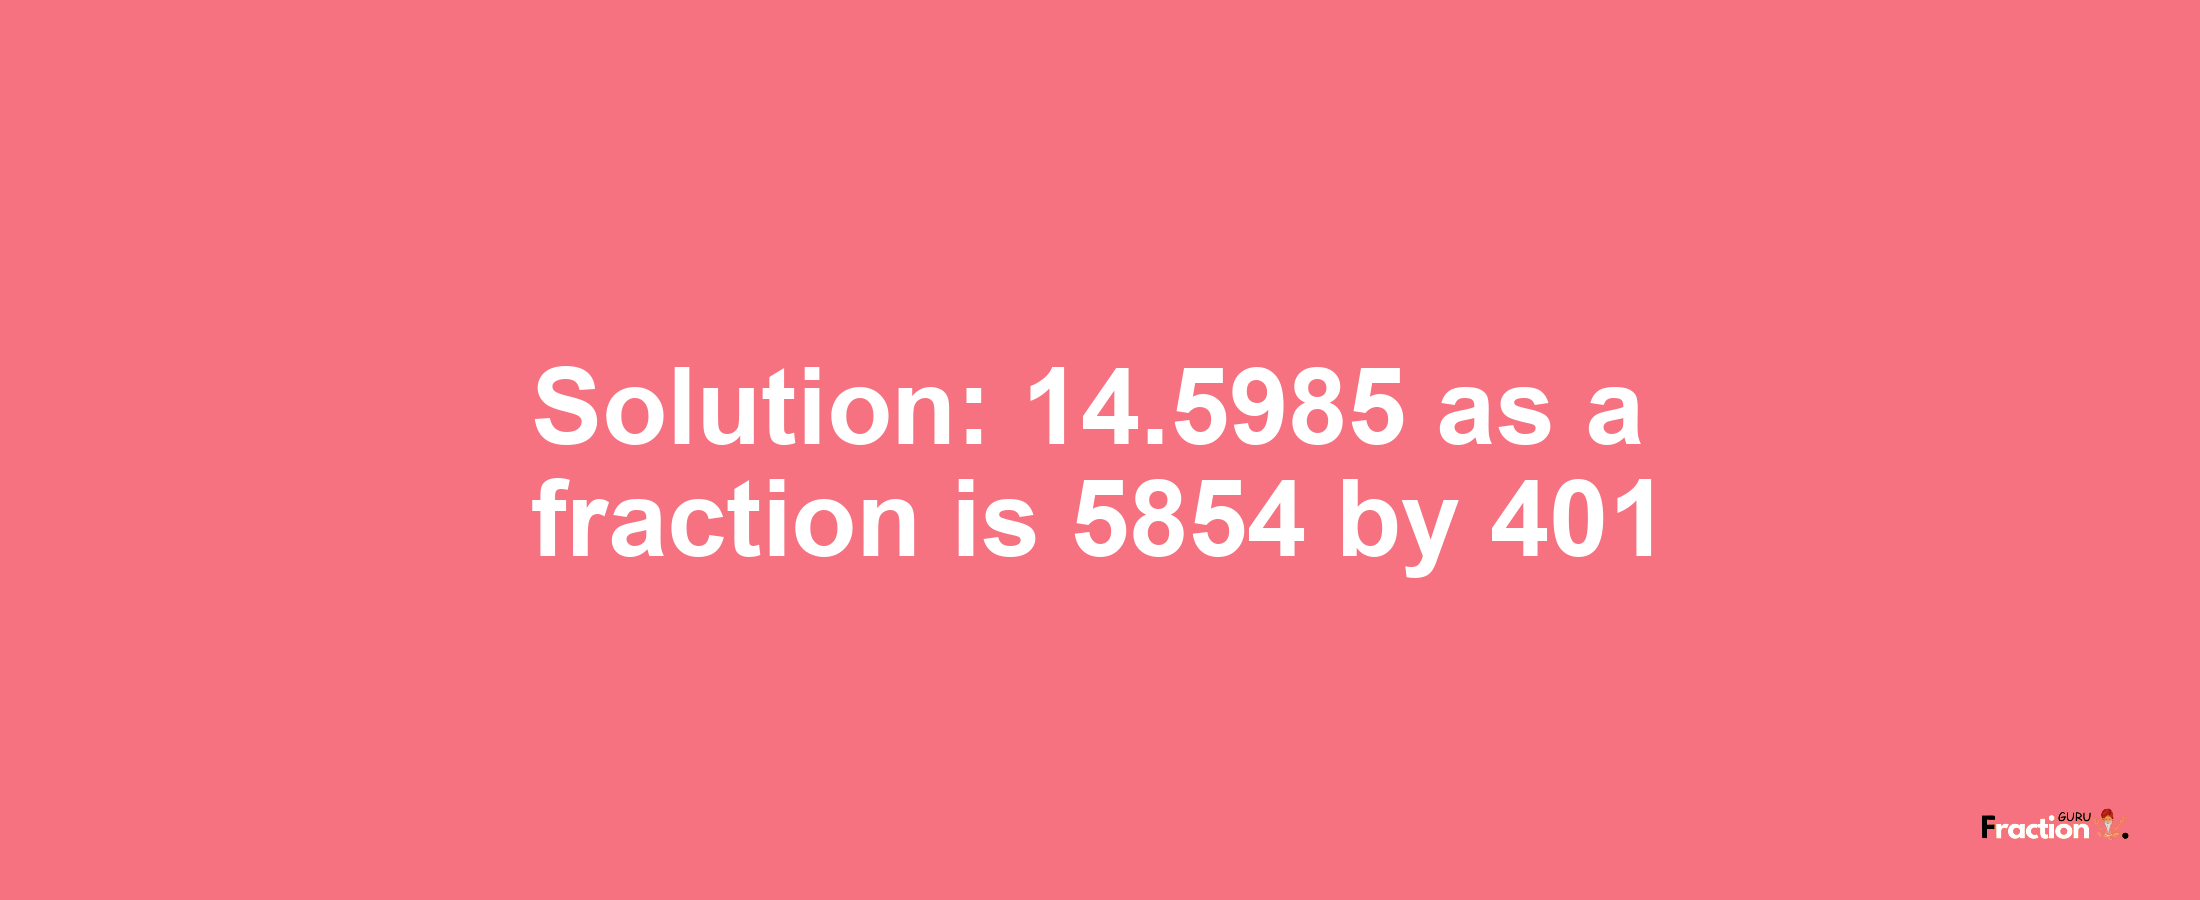 Solution:14.5985 as a fraction is 5854/401